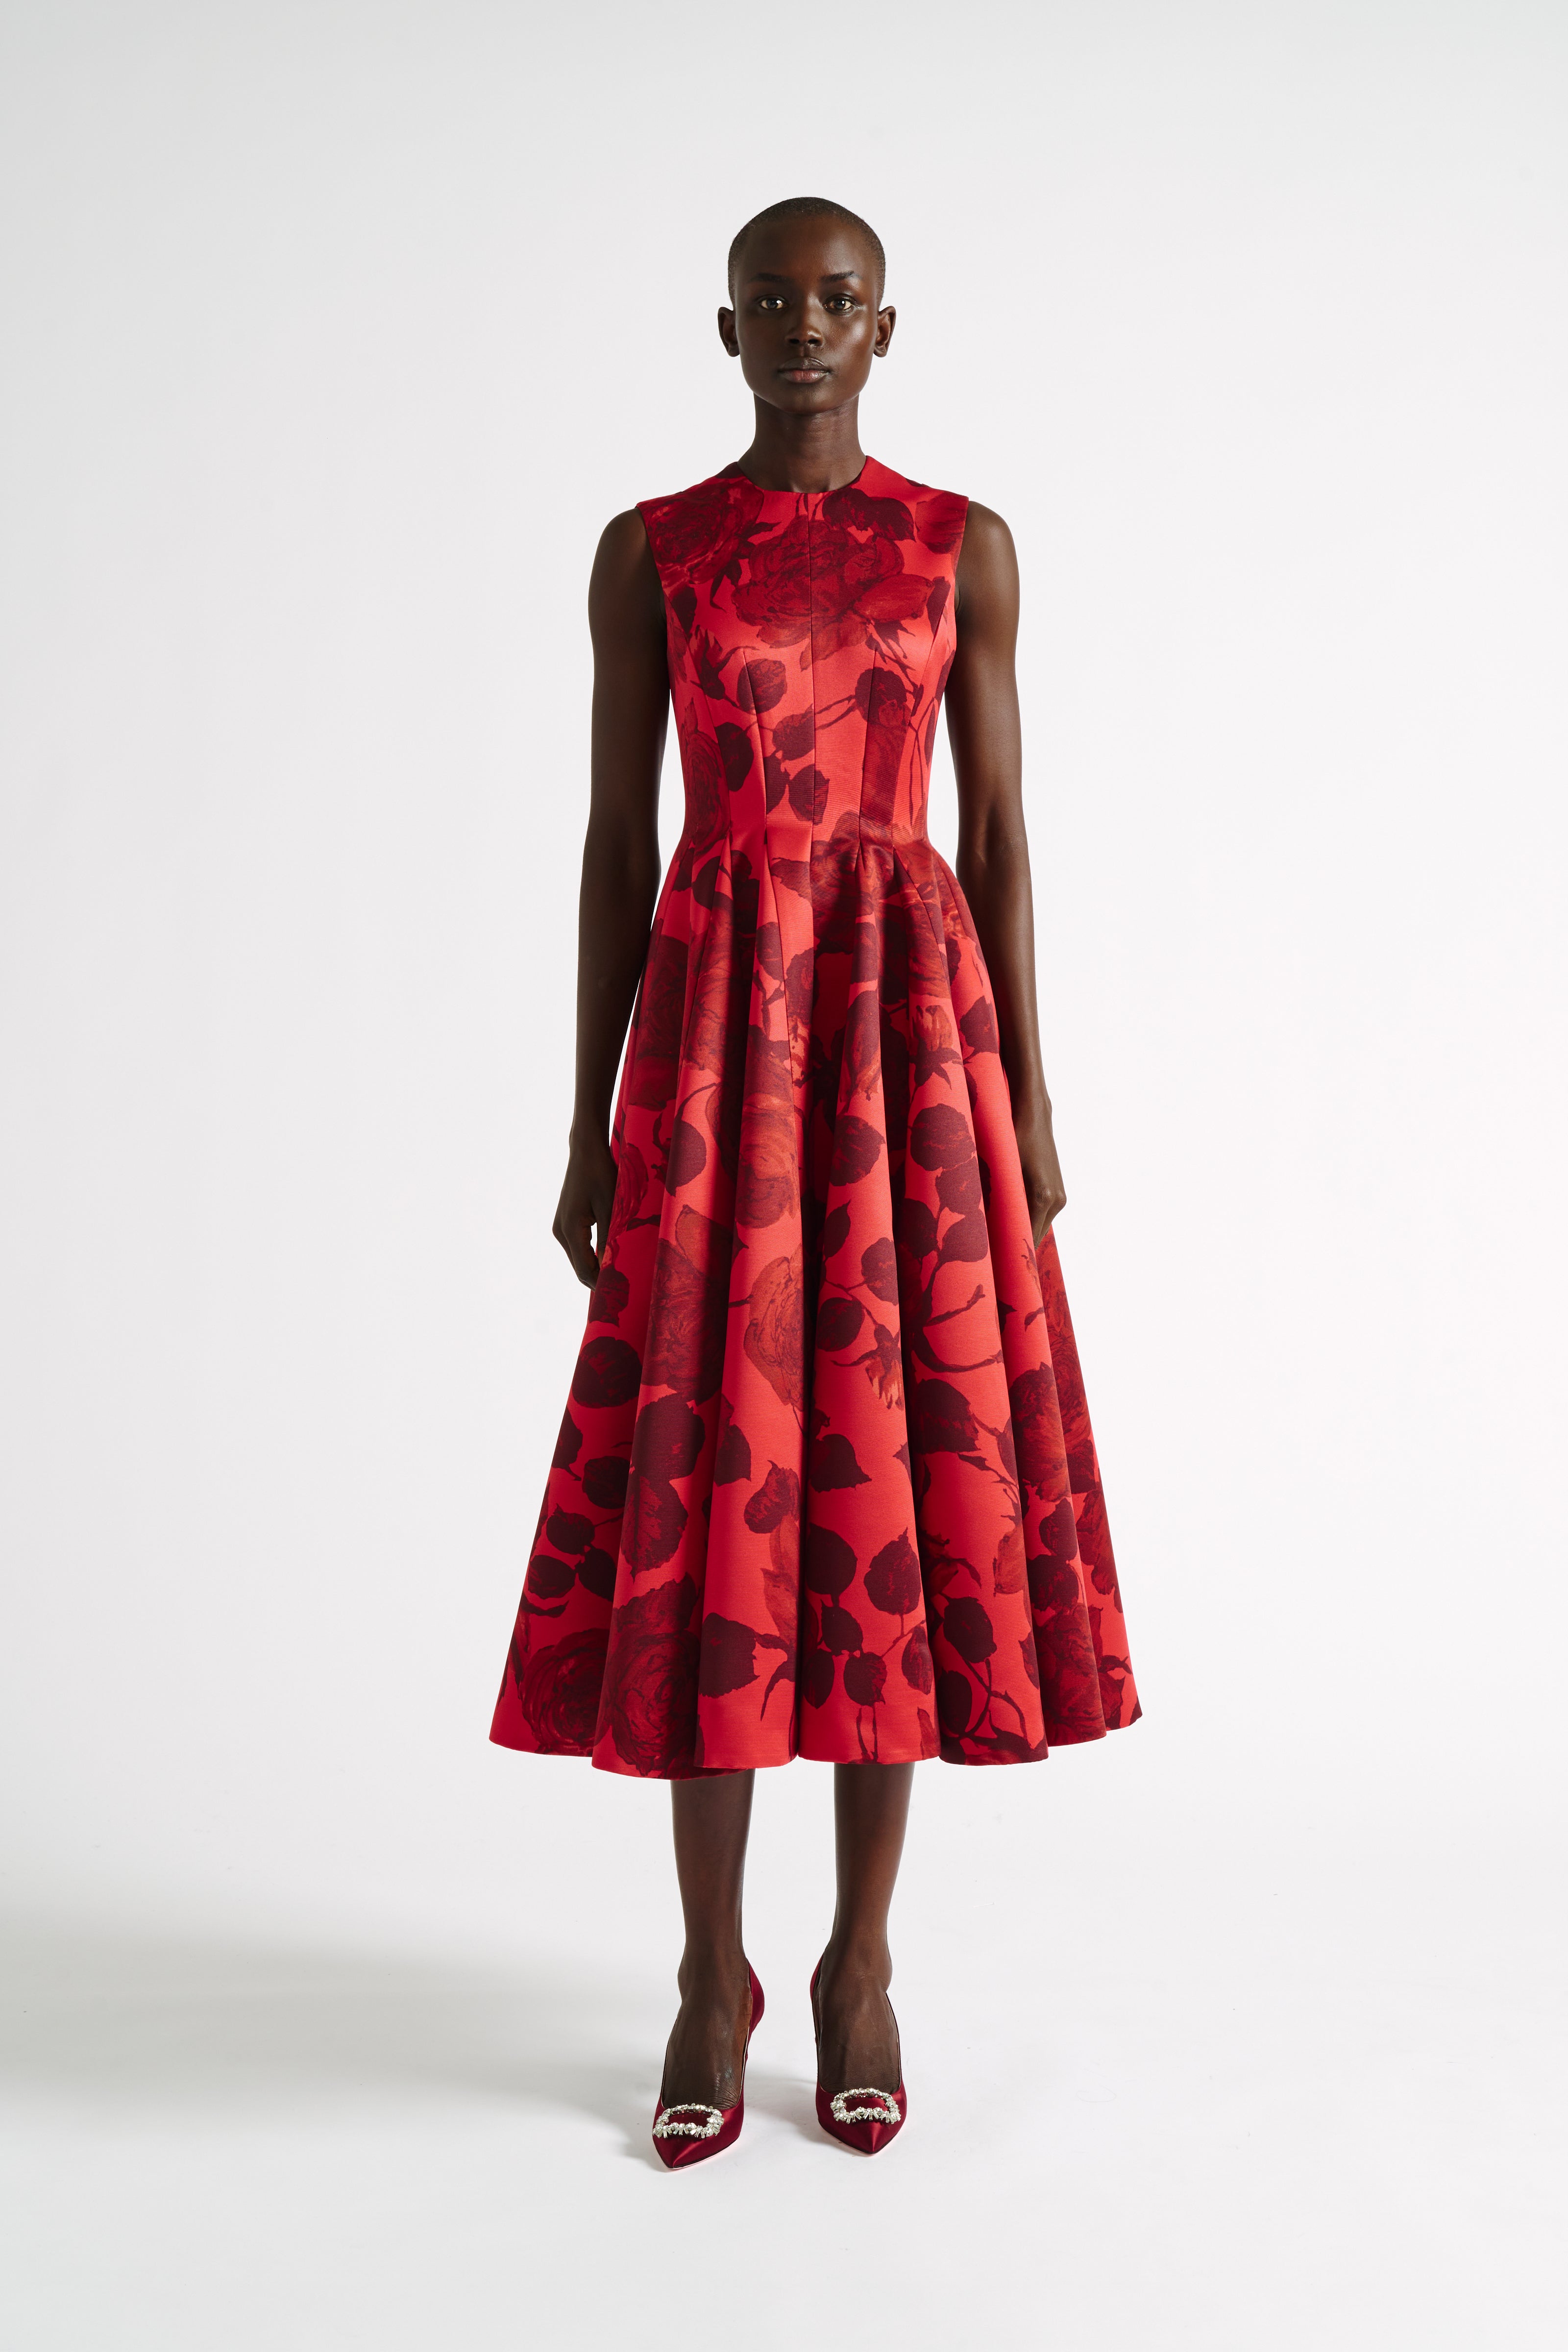 Chelsea Dress | Red Rose Printed Fit-and-Flare Dress | Emilia Wickstead